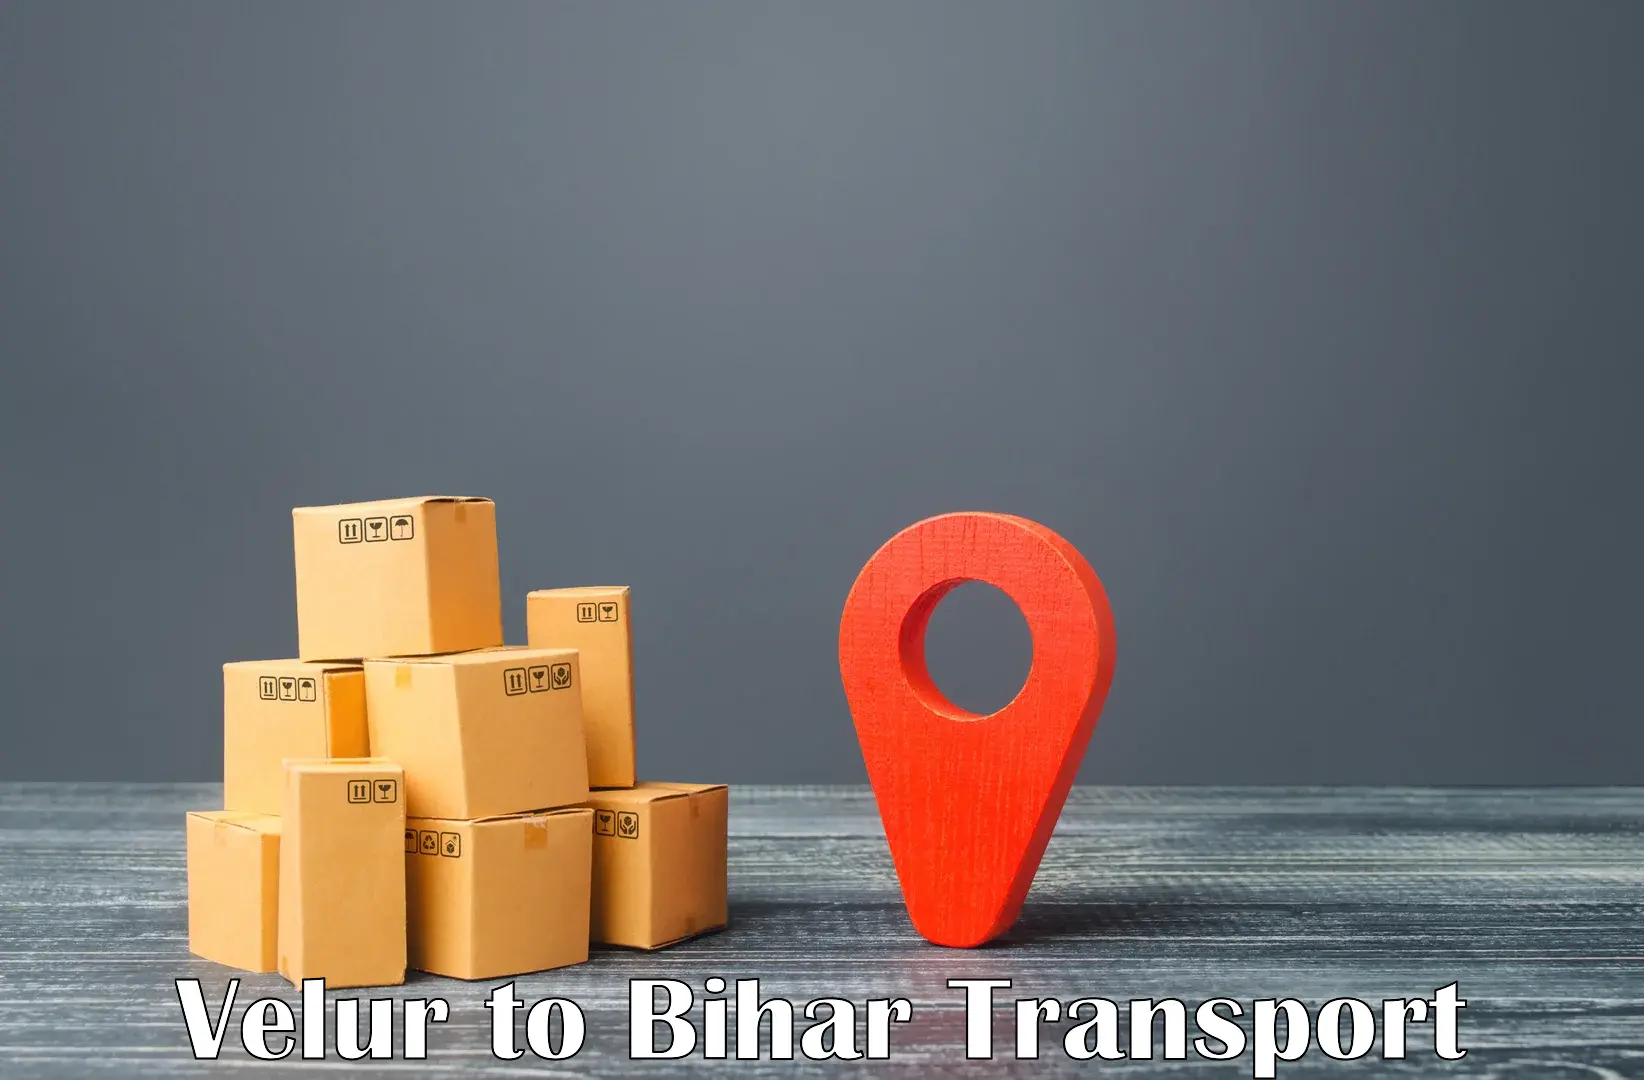 Commercial transport service Velur to Biraul